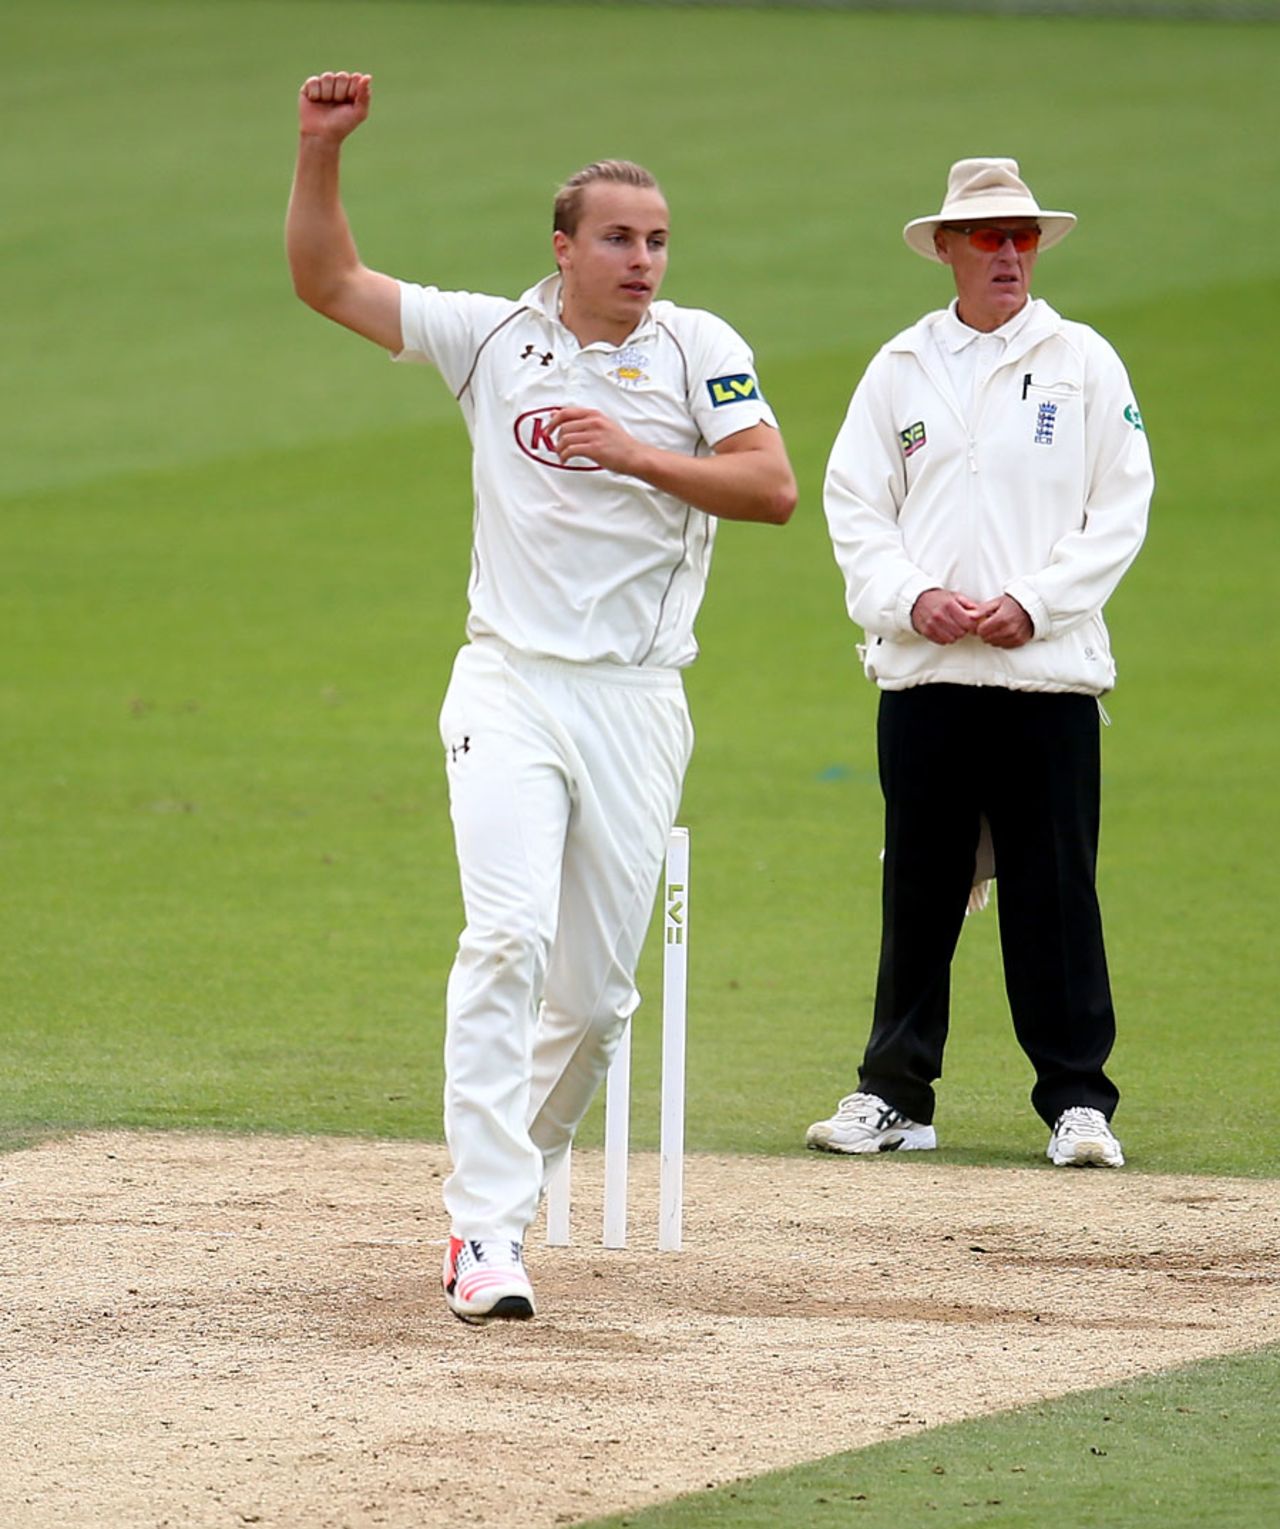 Tom Curran cleaned up Derbyshire to finish with five wickets, Surrey v Derbyshire, LV= County Championship, Division Two, Kia Oval, 2nd day, September 2, 2015